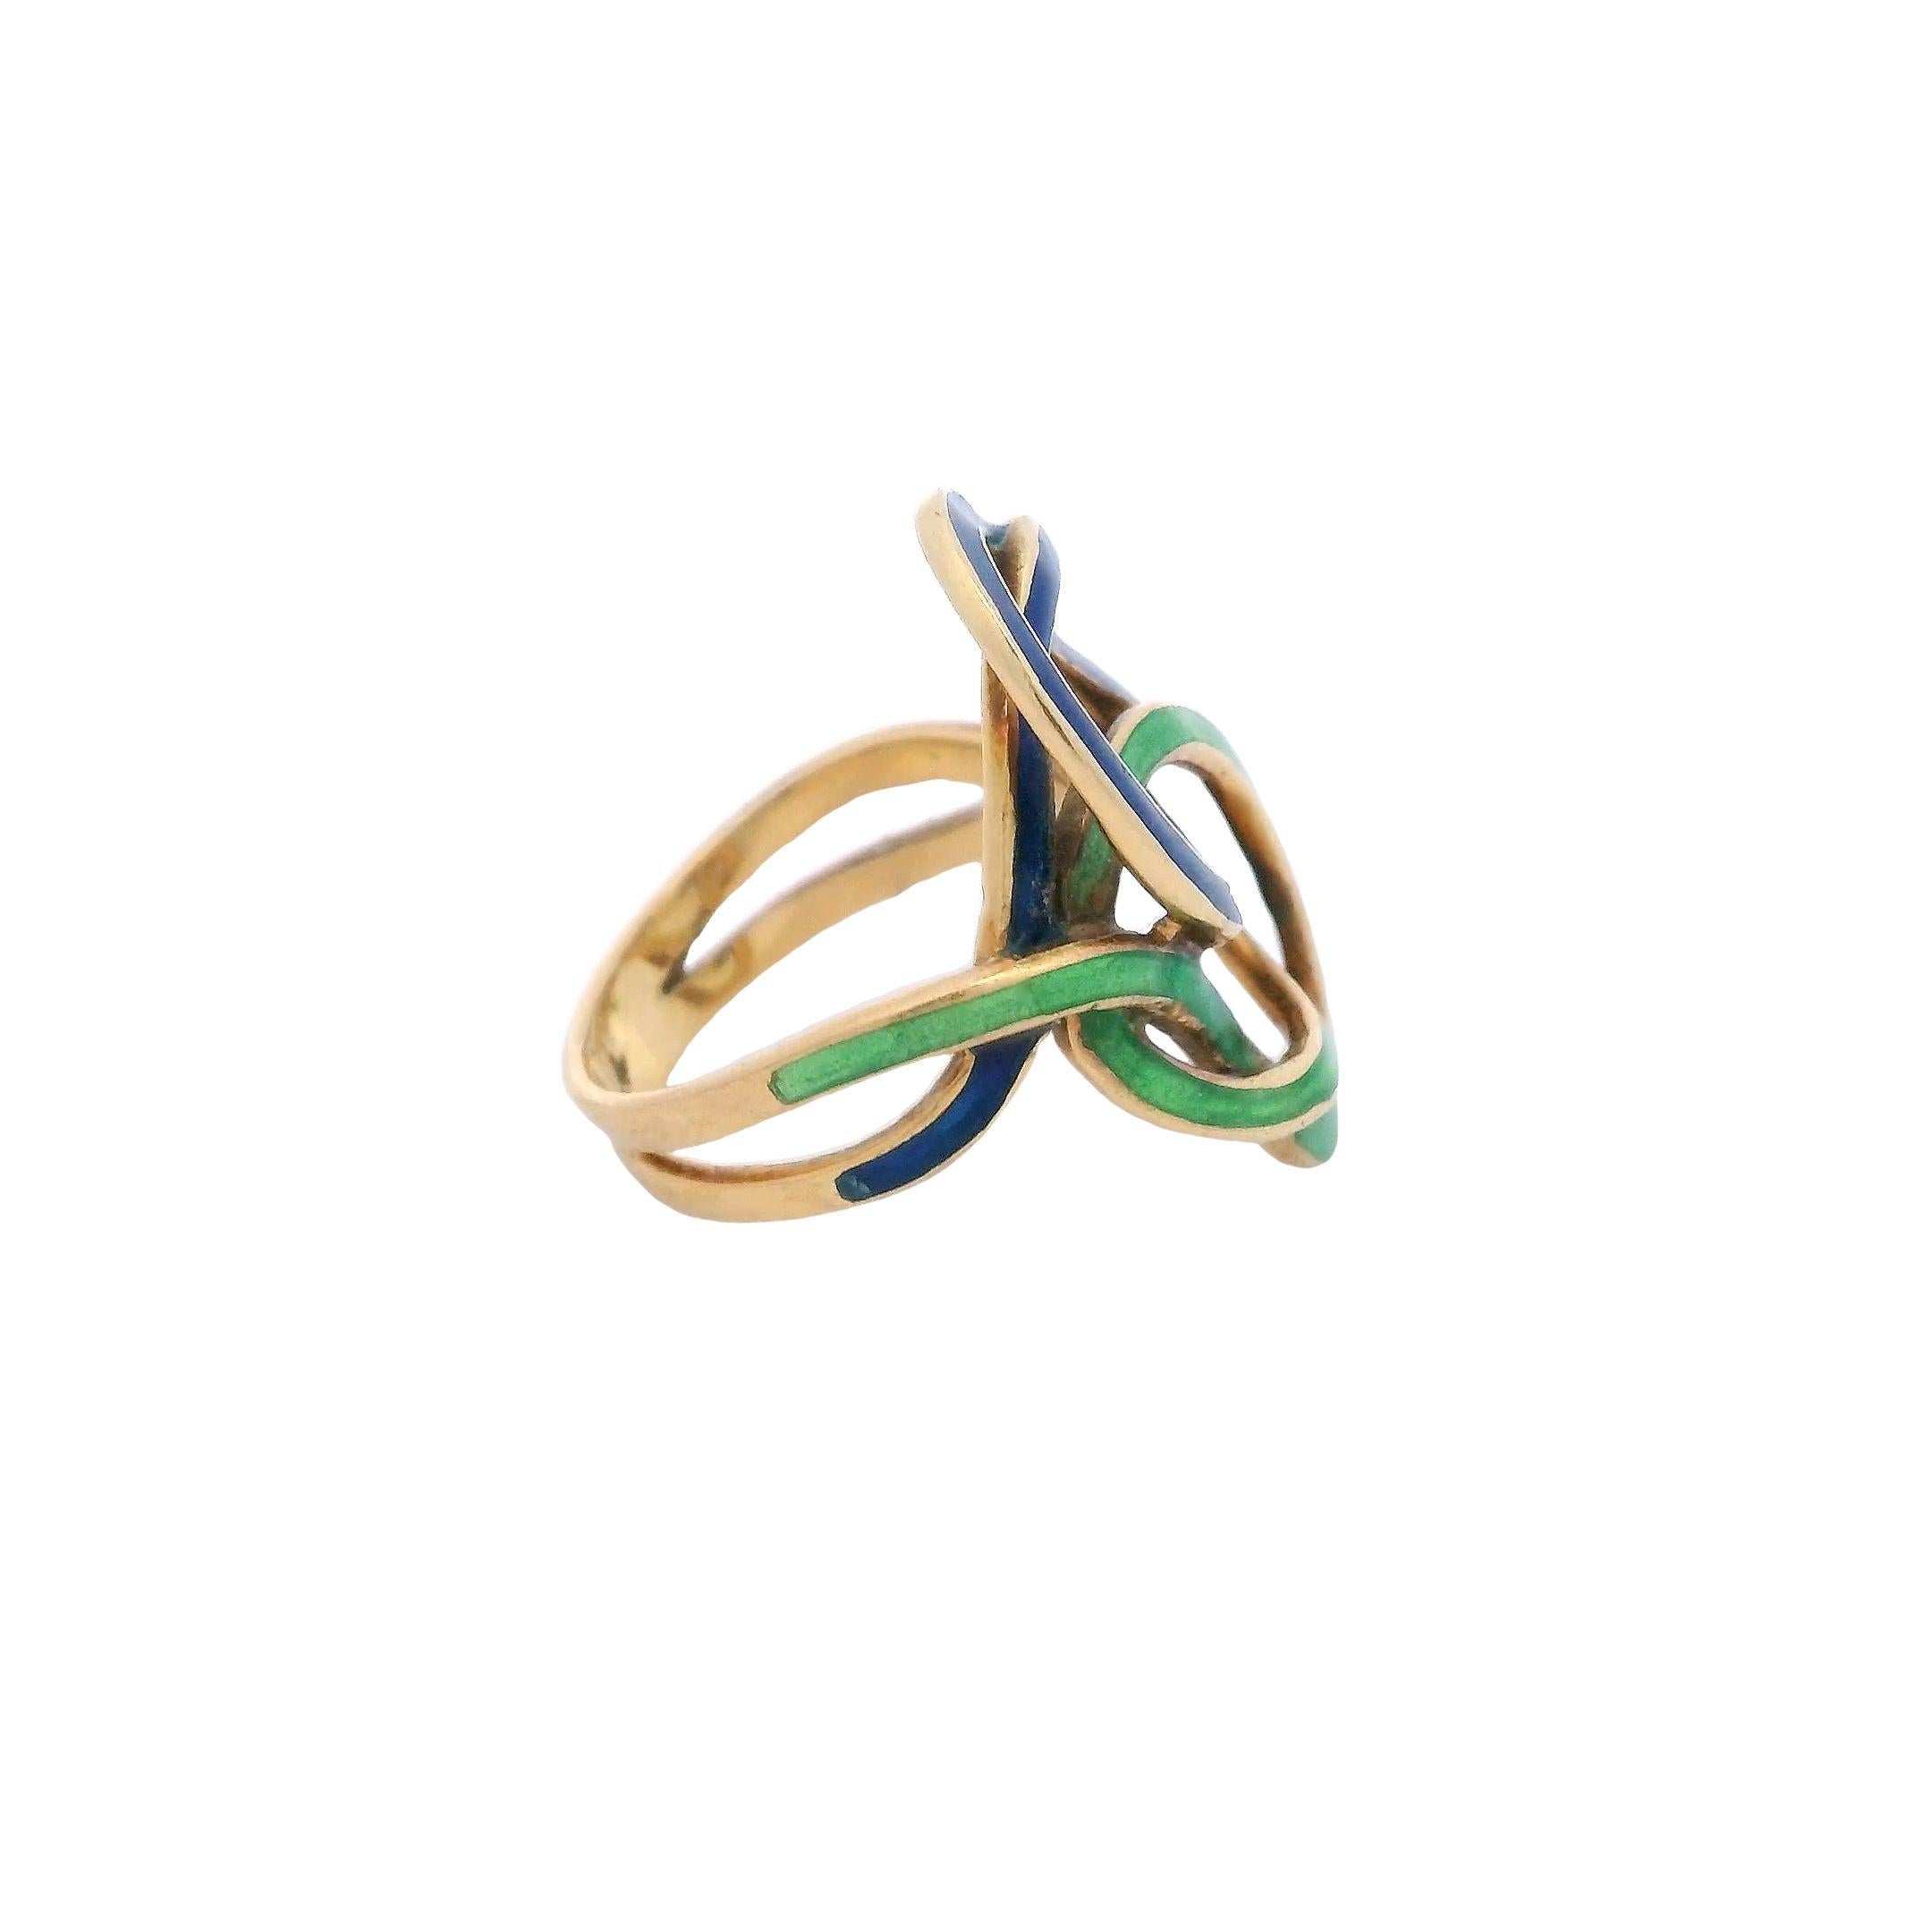 This antique 18 karat yellow gold ring showcases intricate braided metalwork, suggesting skilled hand craftsmanship evident from markings on the back where the metal appears melded. Embellished with blue and green enamel guilloché—a decorative